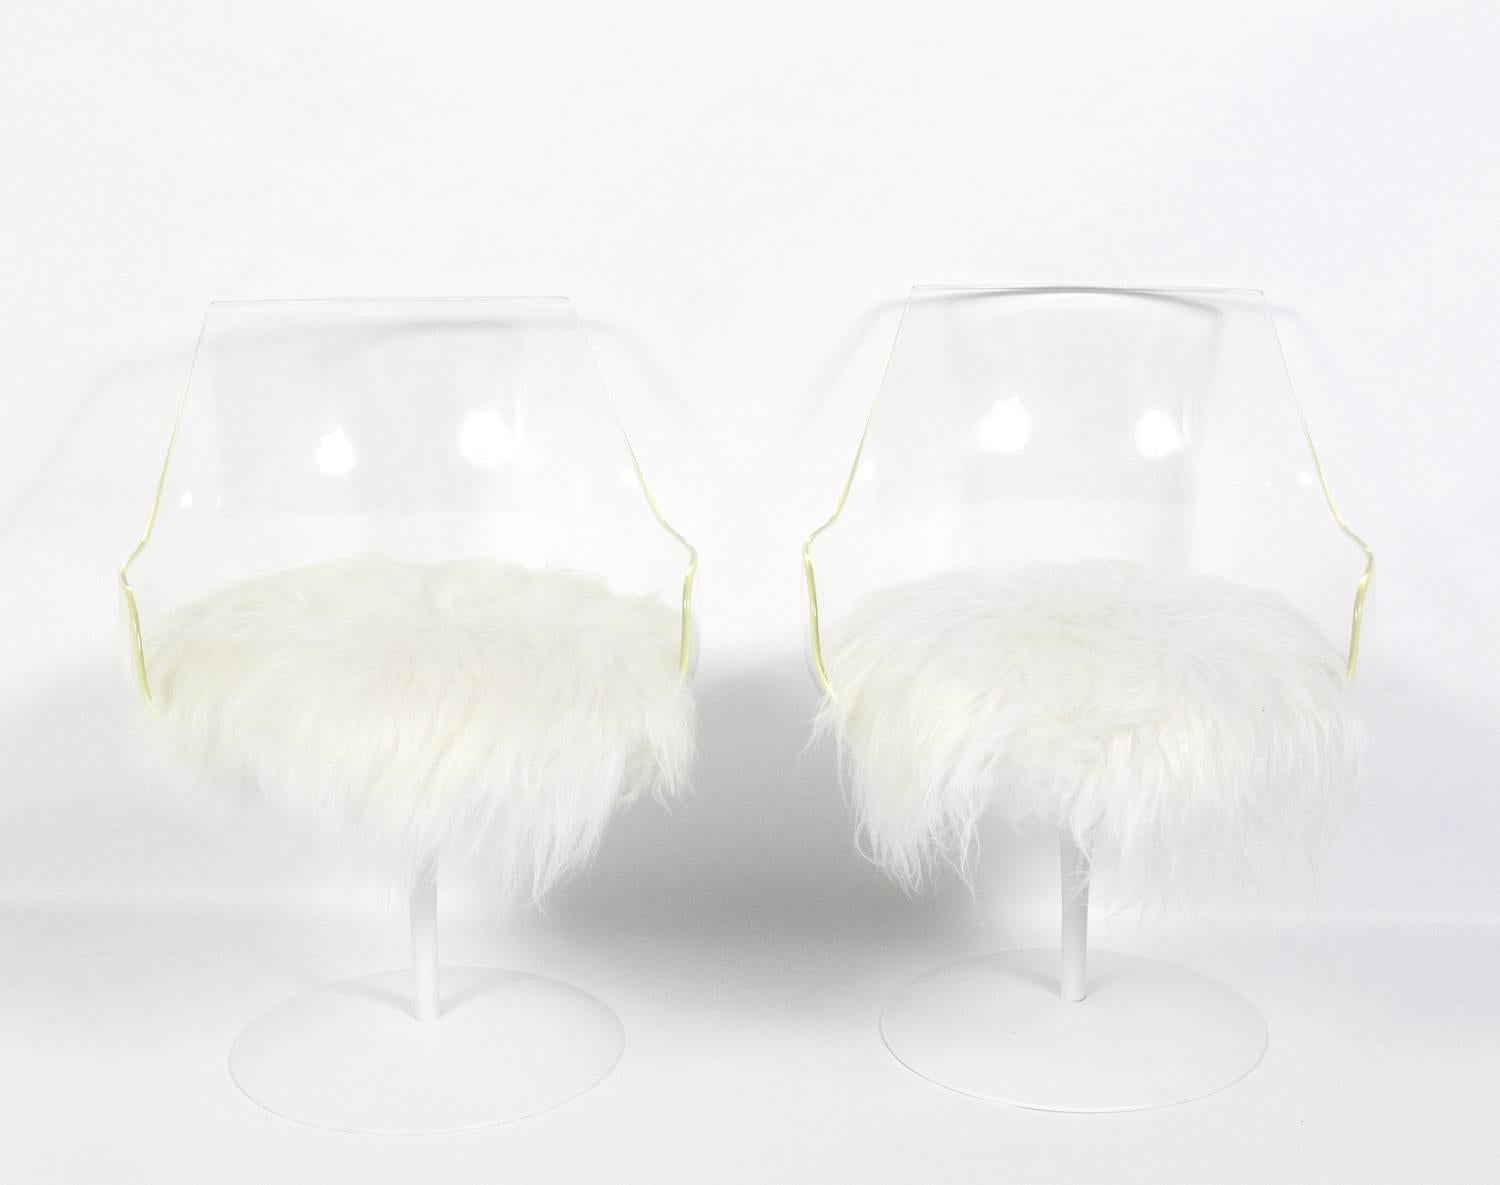 Pair of sculptural Lucite chairs, designed by Erwine and Estelle Laverne, American, circa 1960s. They have been repainted and reupholstered in soft long hair wool. The chairs swivel on the bases.